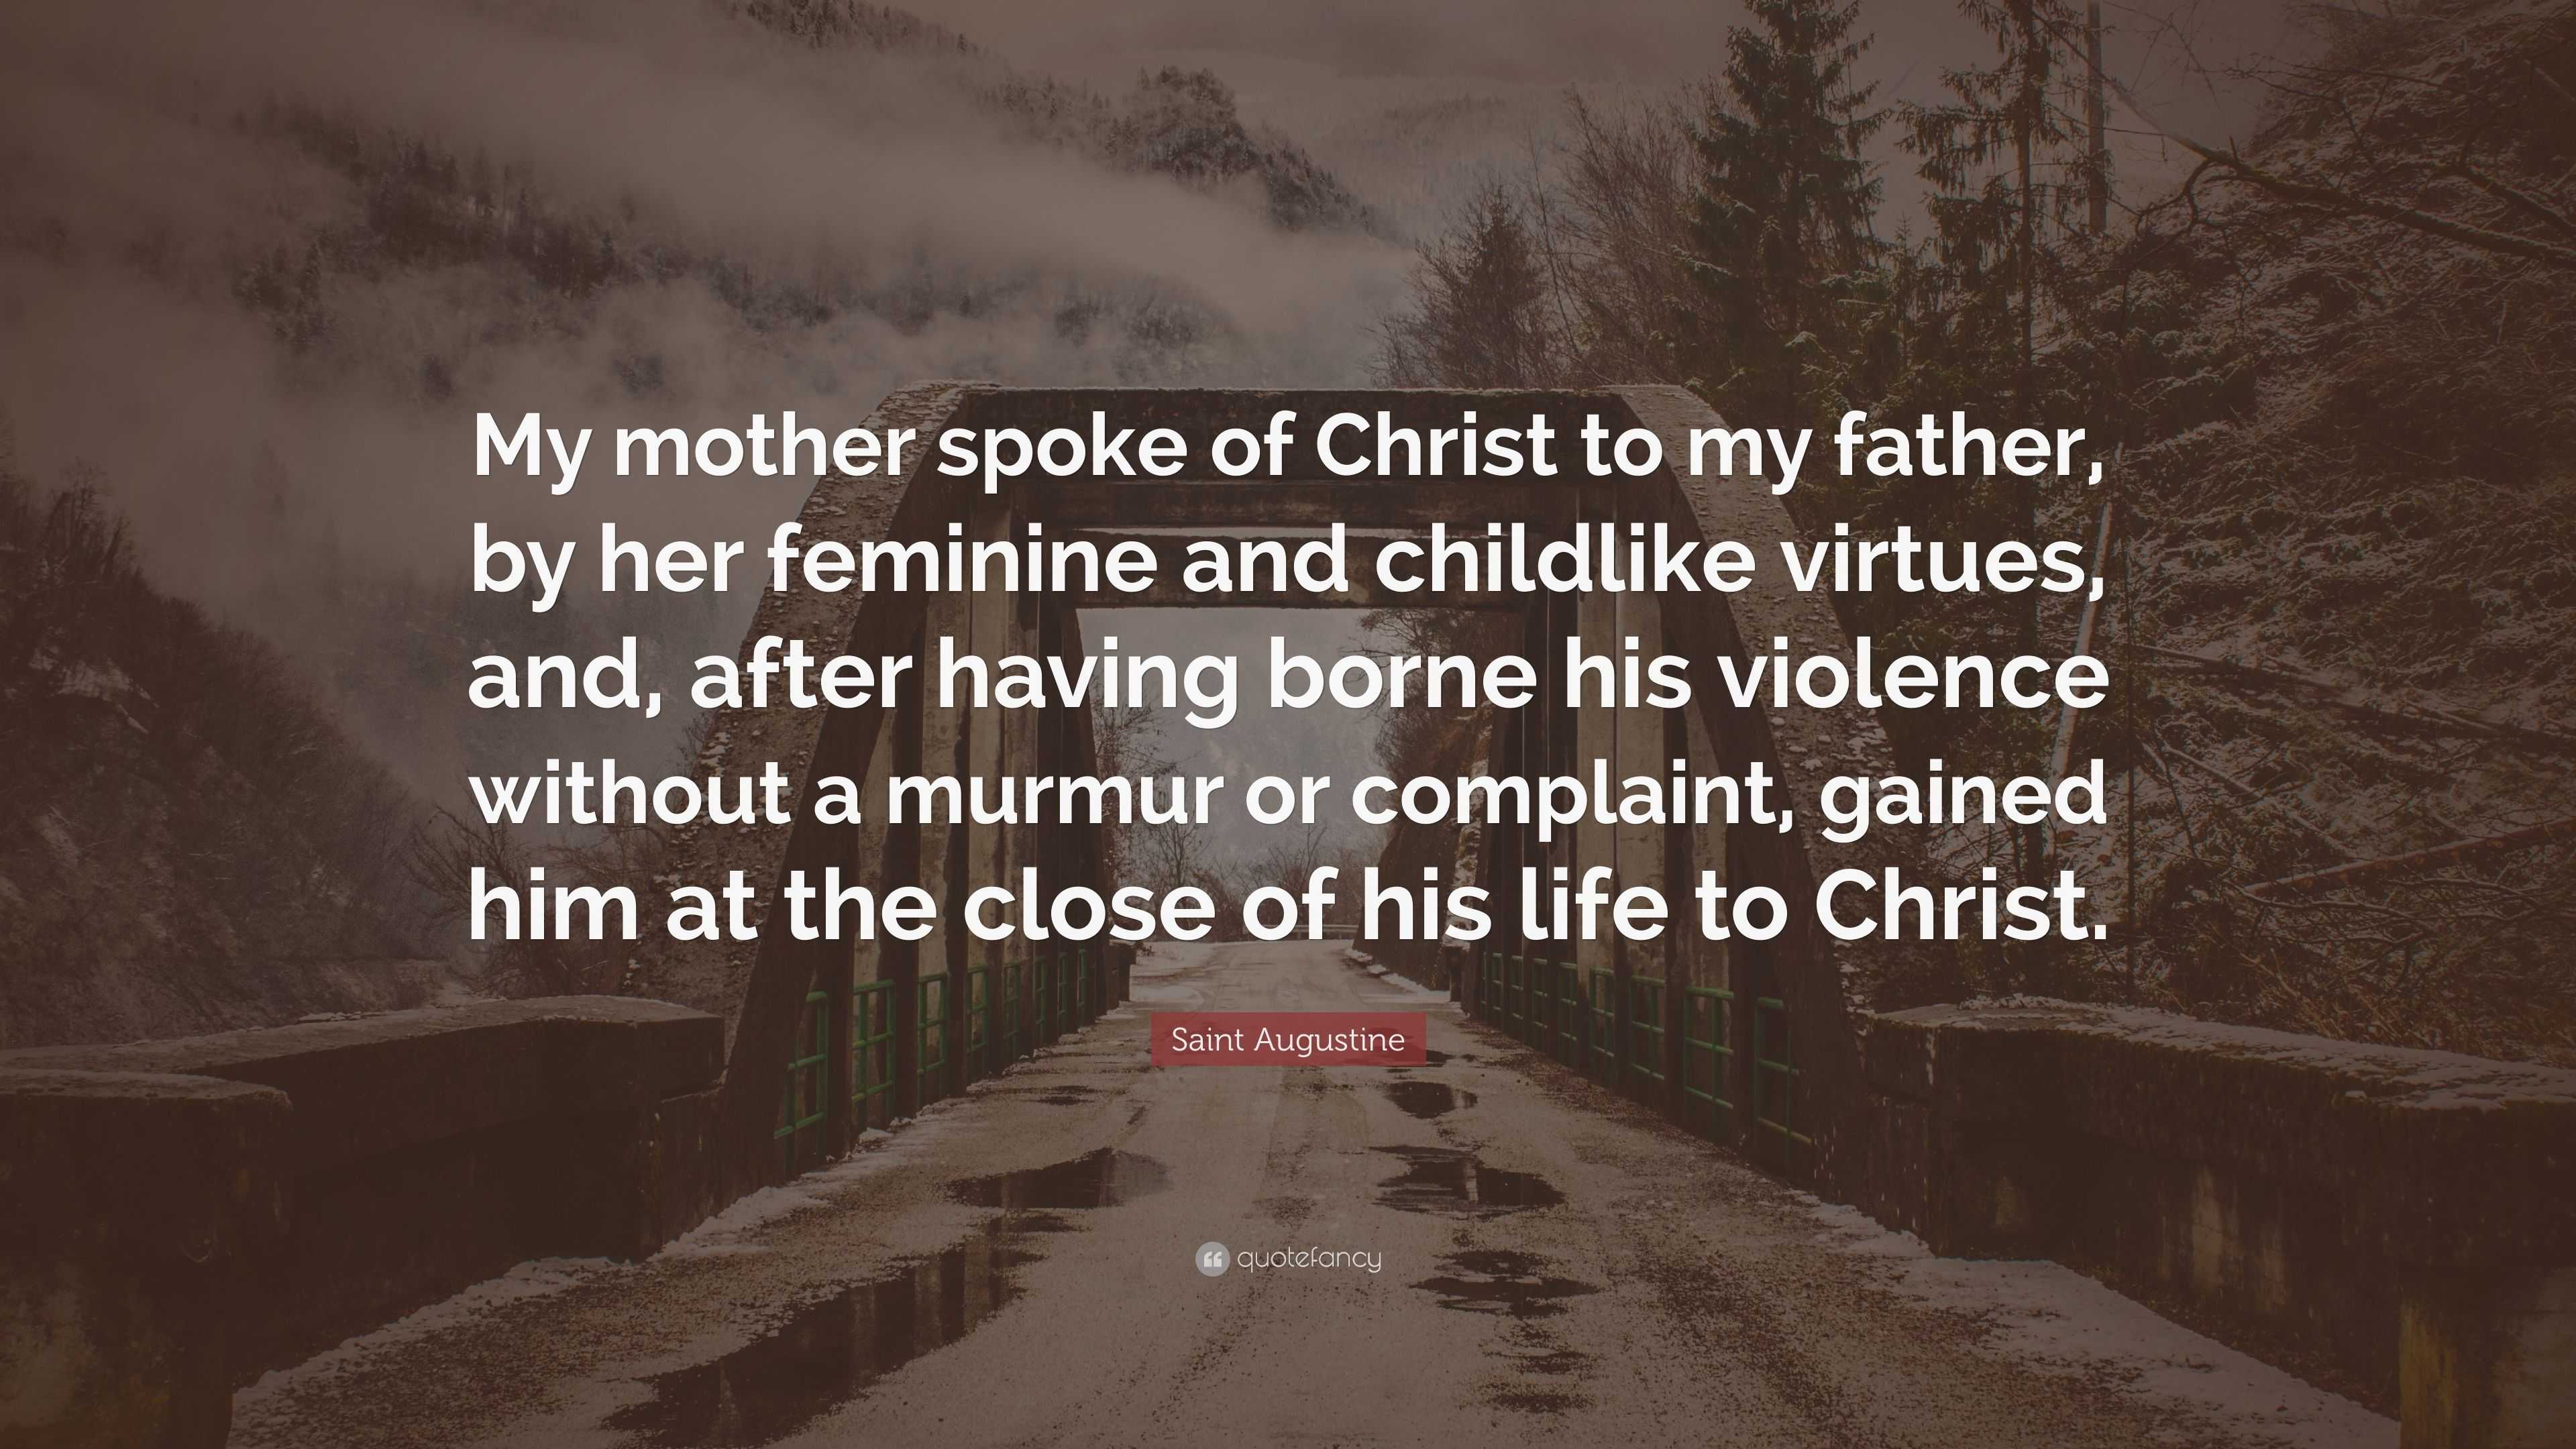 Saint Augustine Quote “My mother spoke of Christ to my father by her